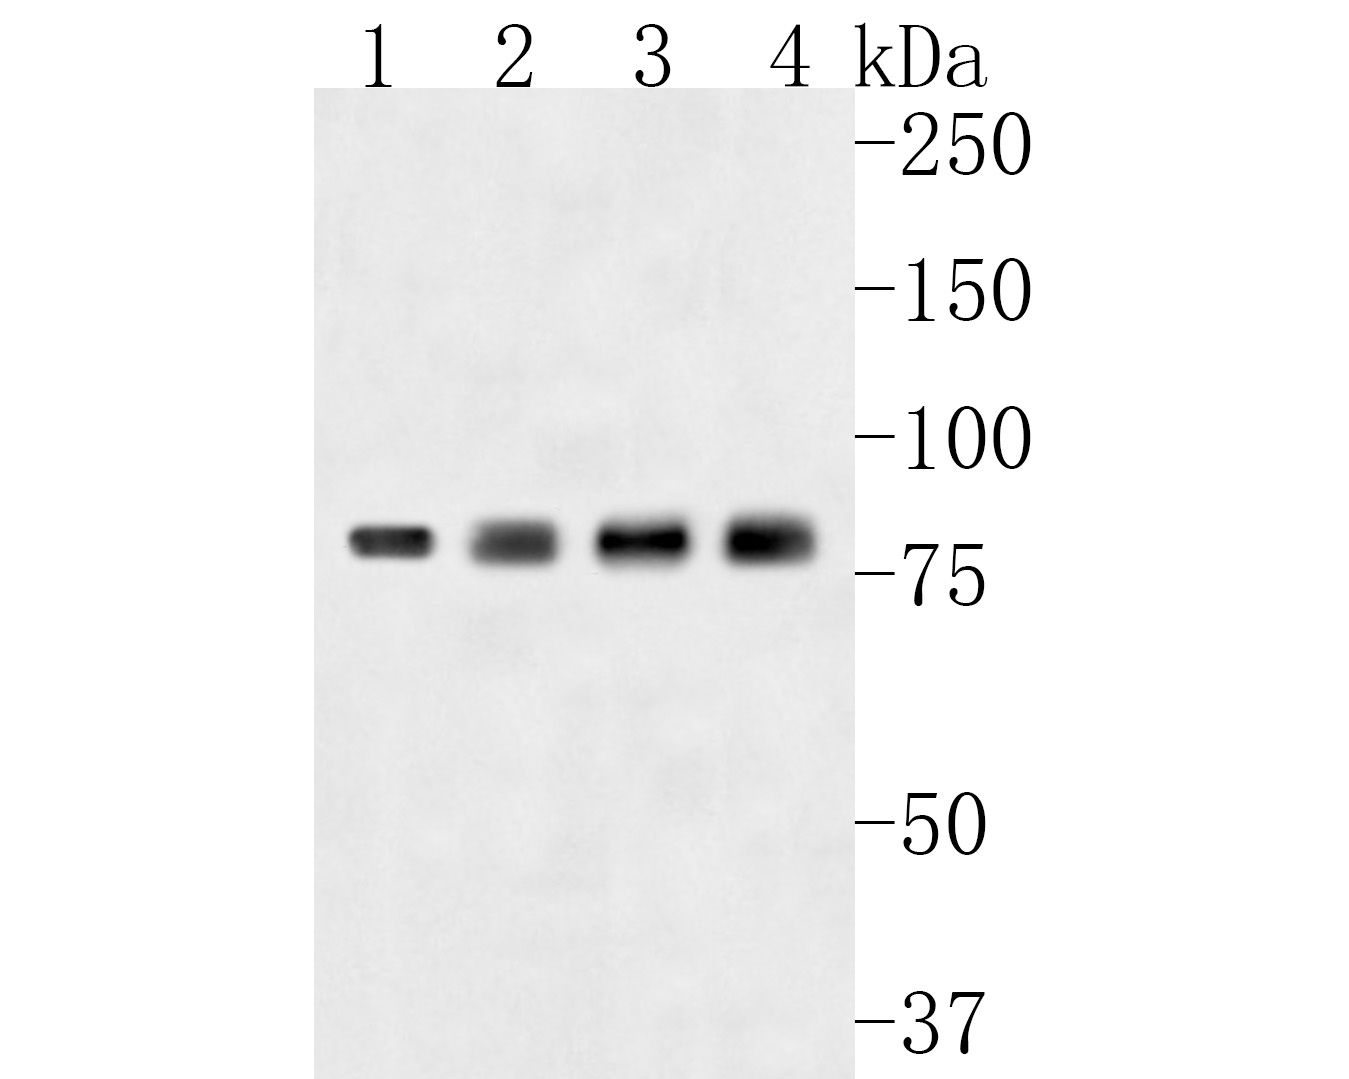 Western blot analysis of THOC5 on different lysates. Proteins were transferred to a PVDF membrane and blocked with 5% BSA in PBS for 1 hour at room temperature. The primary antibody (HA500129, 1/500) was used in 5% BSA at room temperature for 2 hours. Goat Anti-Rabbit IgG - HRP Secondary Antibody (HA1001) at 1:40,000 dilution was used for 1 hour at room temperature.<br />
Positive control: <br />
Lane 1: NIH/3T3 cell lysate<br />
Lane 2: PC-12 cell lysate<br />
Lane 3: Hela cell lysate<br />
Lane 4: HepG2 cell lysate